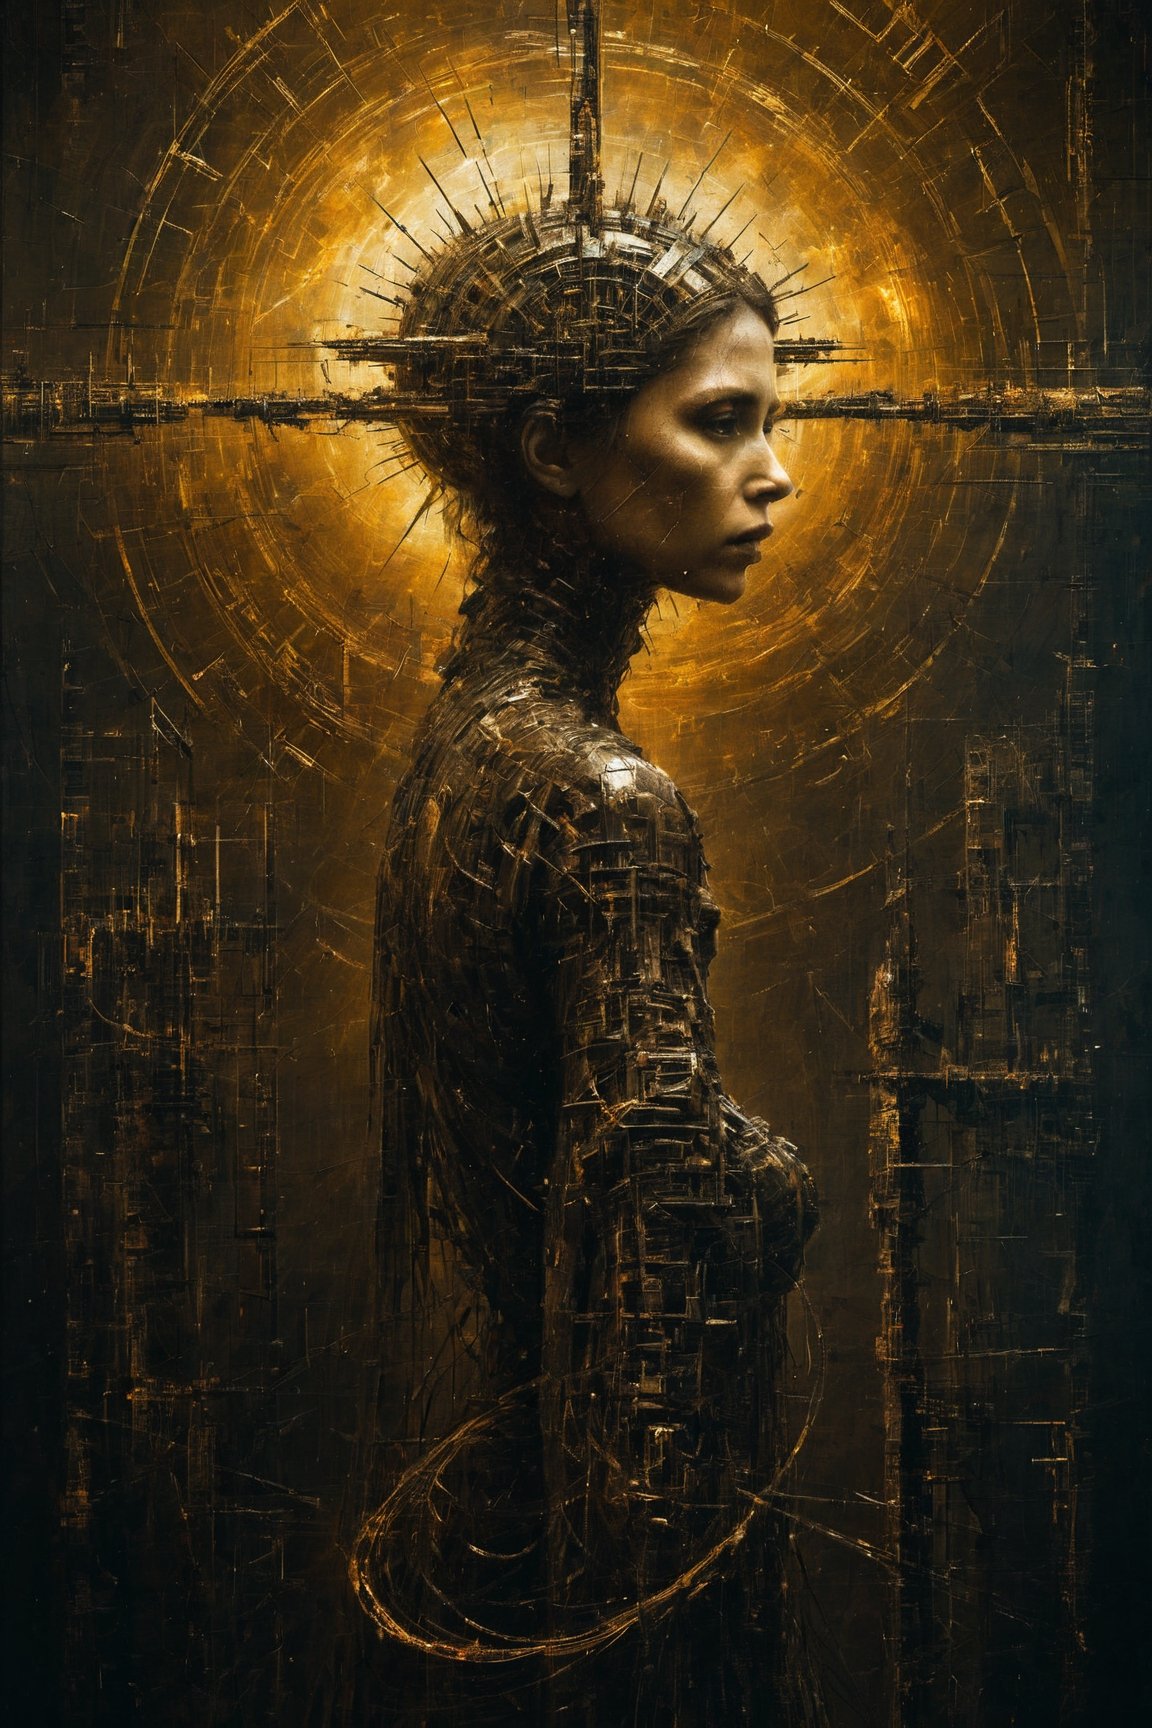 Modern art style on the theme of "1997 film Event Horizon" in the style of Stefan Gesell, golden ratio, horrible scene, fear, death, Movie Still, abstract, Magical Fantasy style